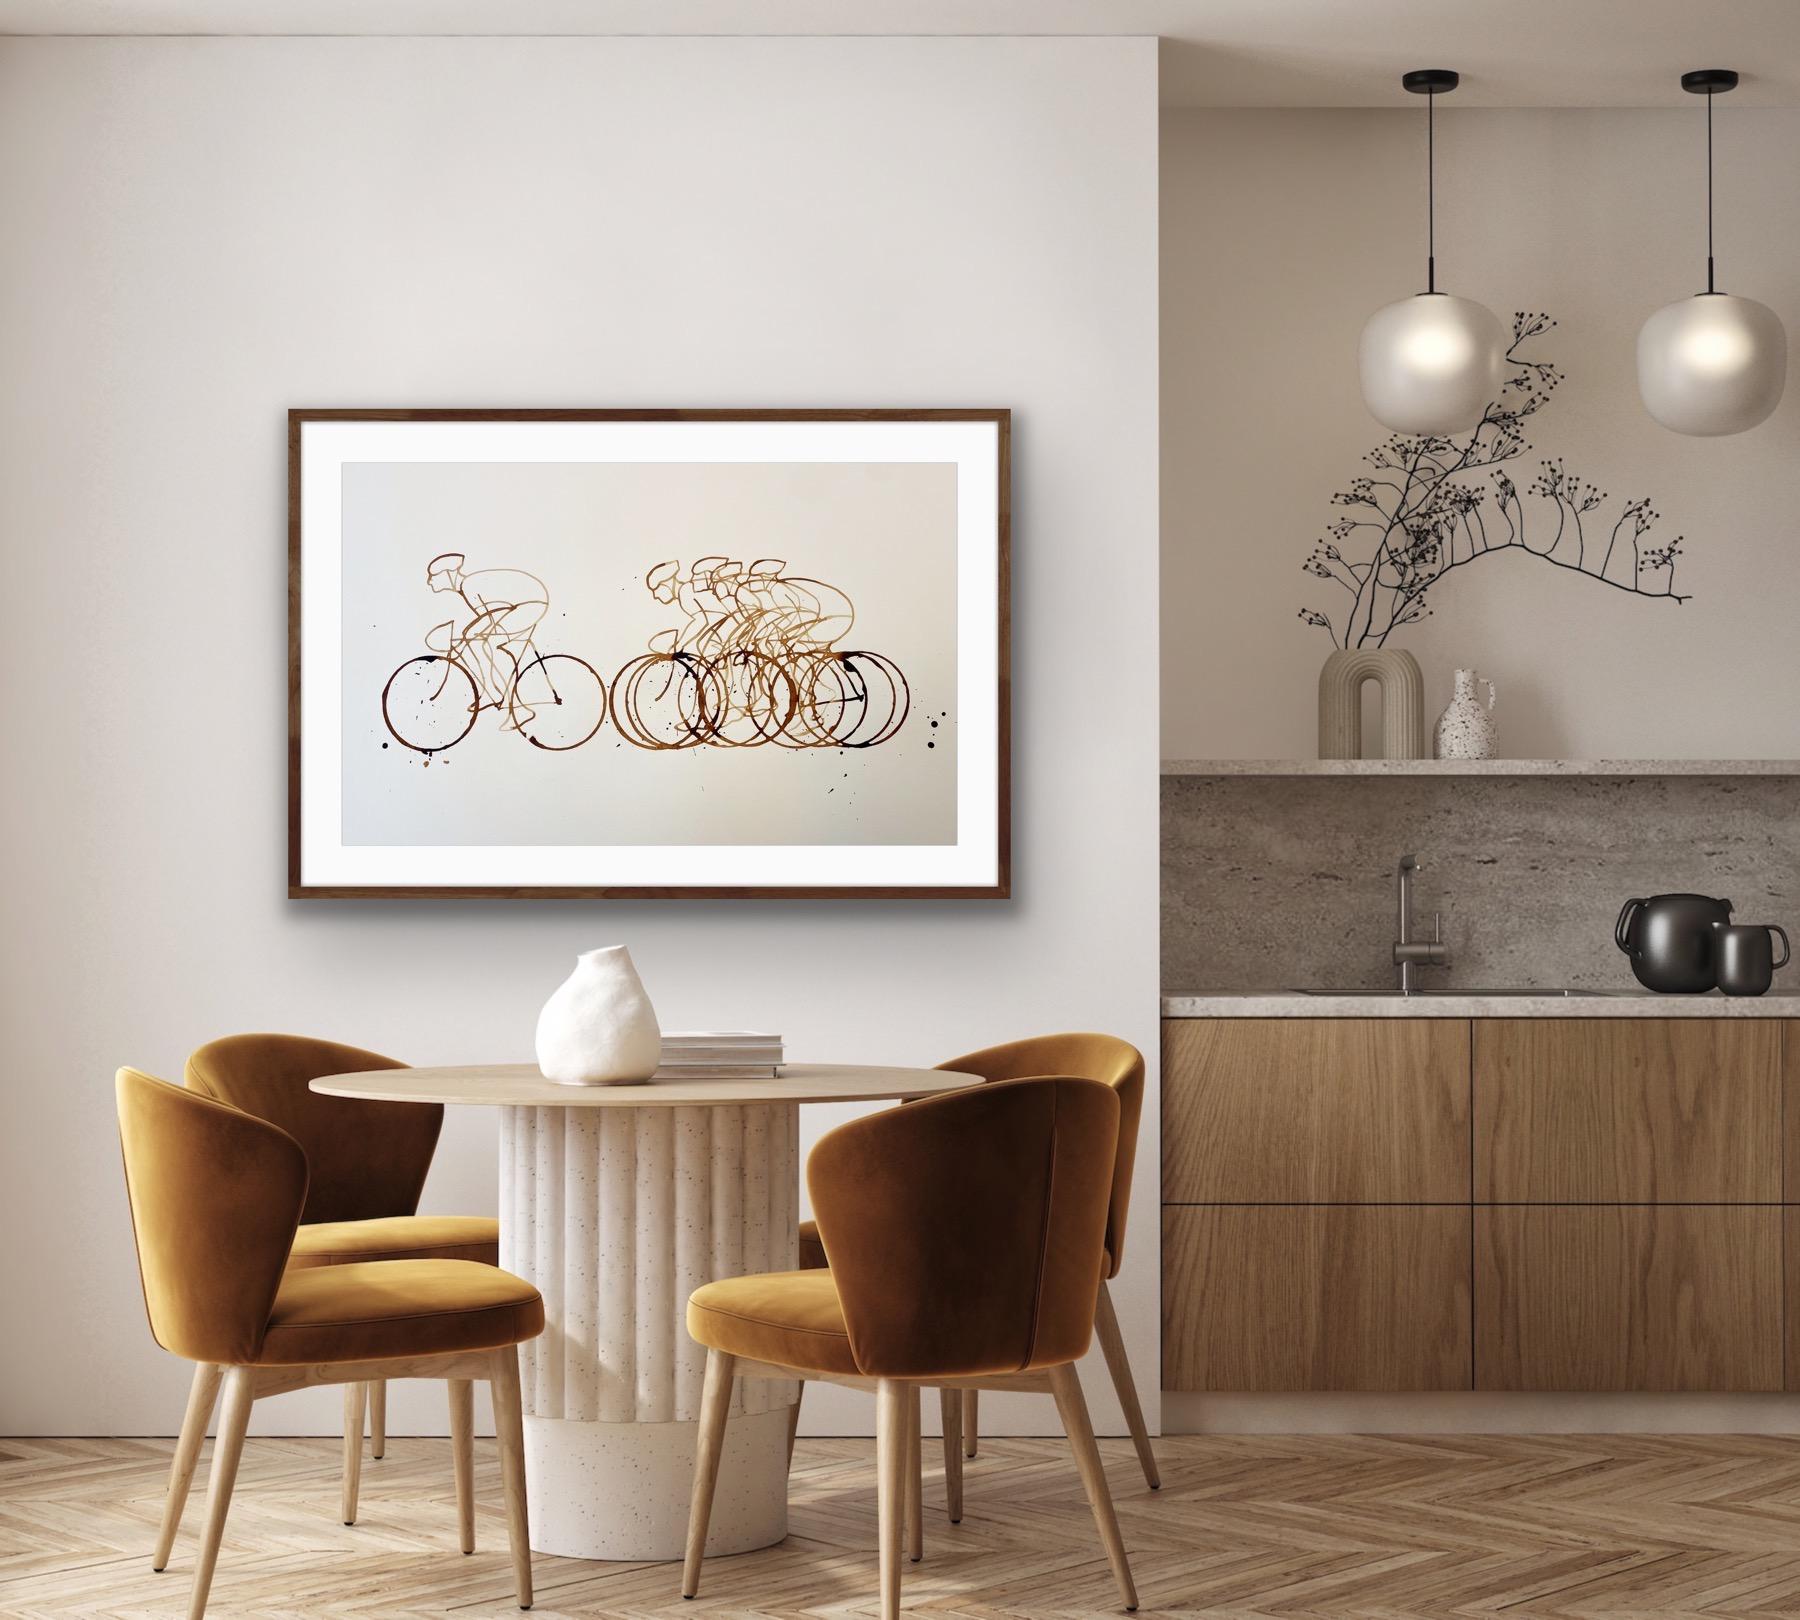 Original Artwork of cyclists, made from specially treated coffee and then submitted to a further setting treatment so the artwork will last

Complete size of sheet: 42 x 59.4 cm

ADDITIONAL INFORMATION:
Coffee Break (CB02_nov23) by Eliza